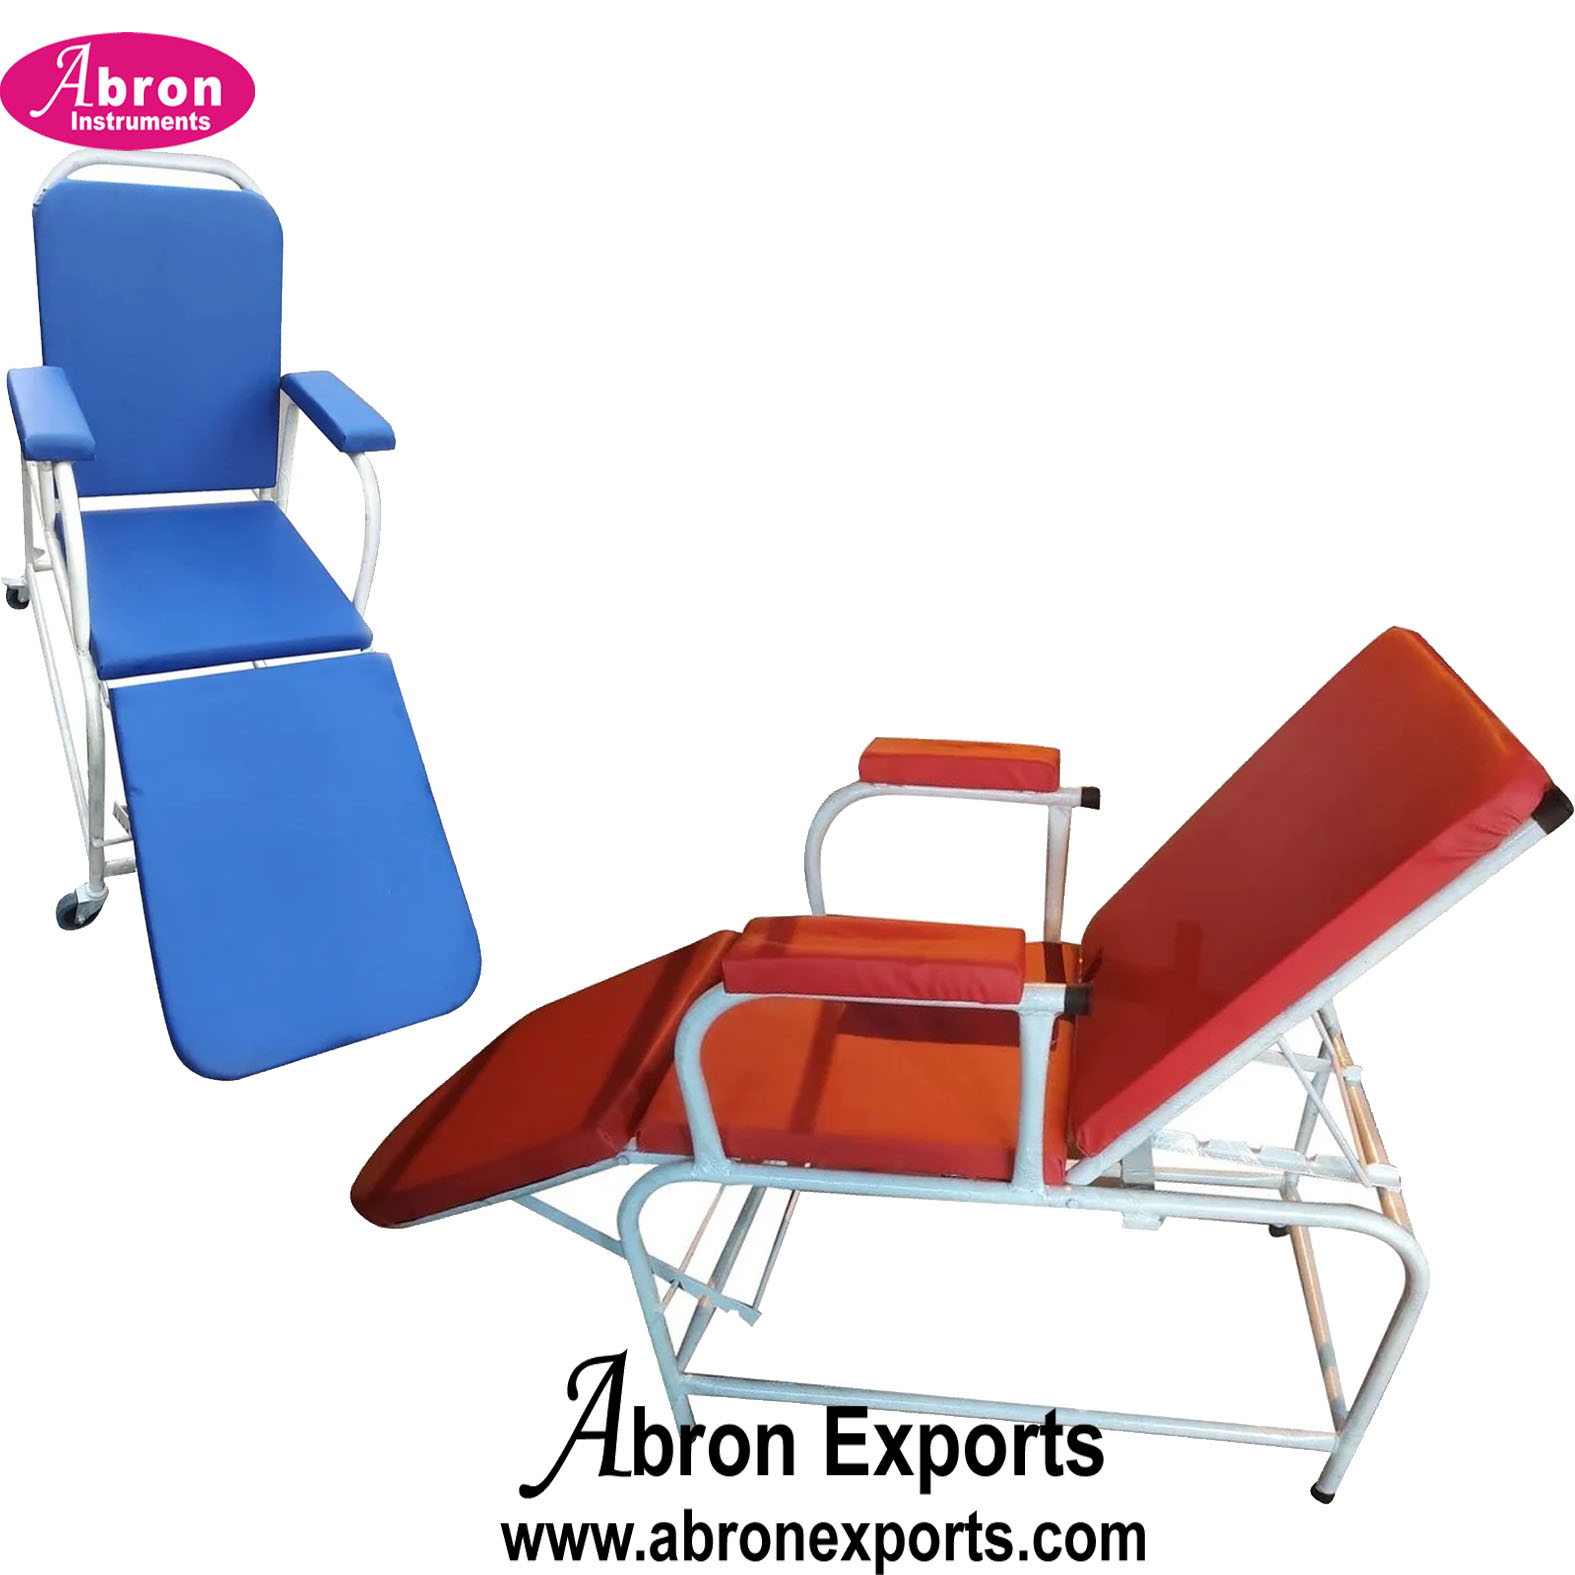 ENT Eye Ophthalmic Recliner Chair Manual steel frame Arm support Clinic Hospital Nursing Home Abron ABM-1532S1 